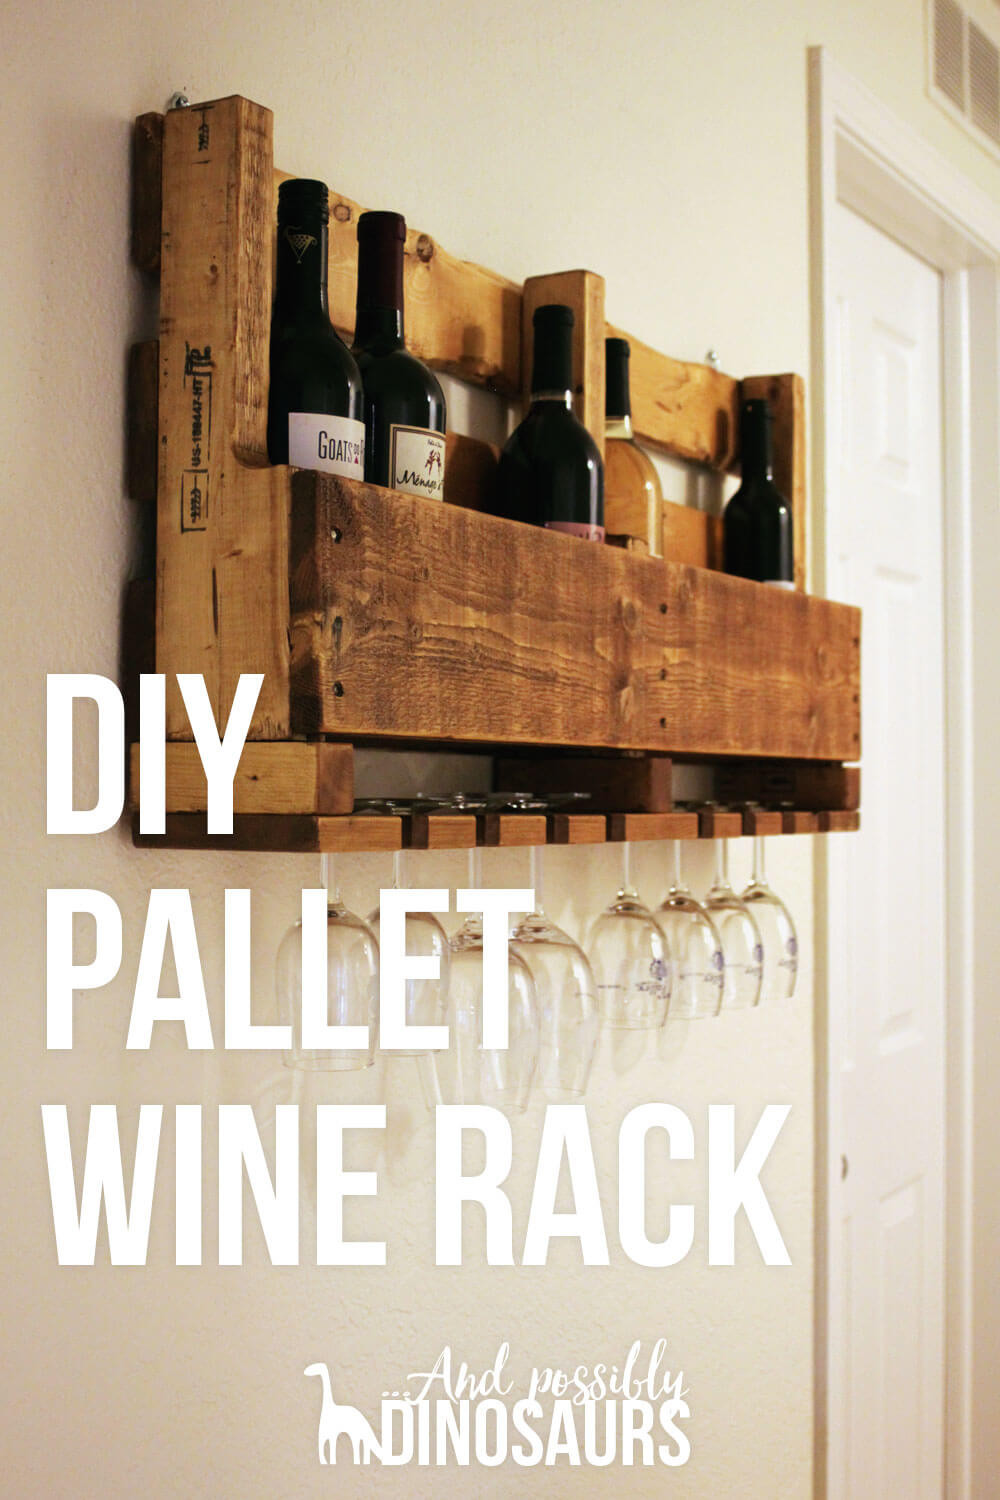 DIY Wine Rack Pallet
 DIY Wine Rack from a Pallet And Possibly Dinosaurs